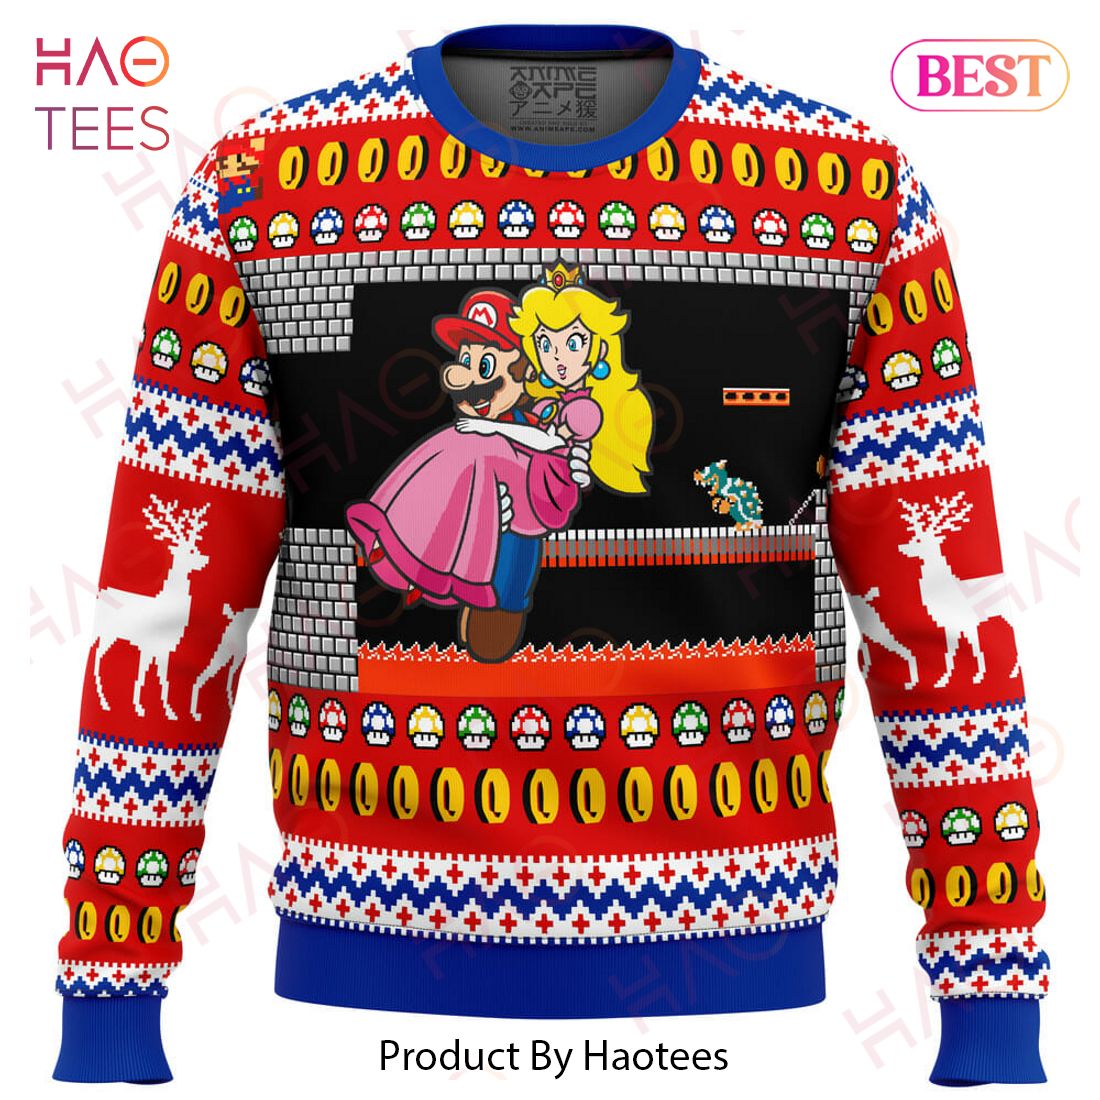 Mario Bowser’s Castle Ugly Christmas Sweater